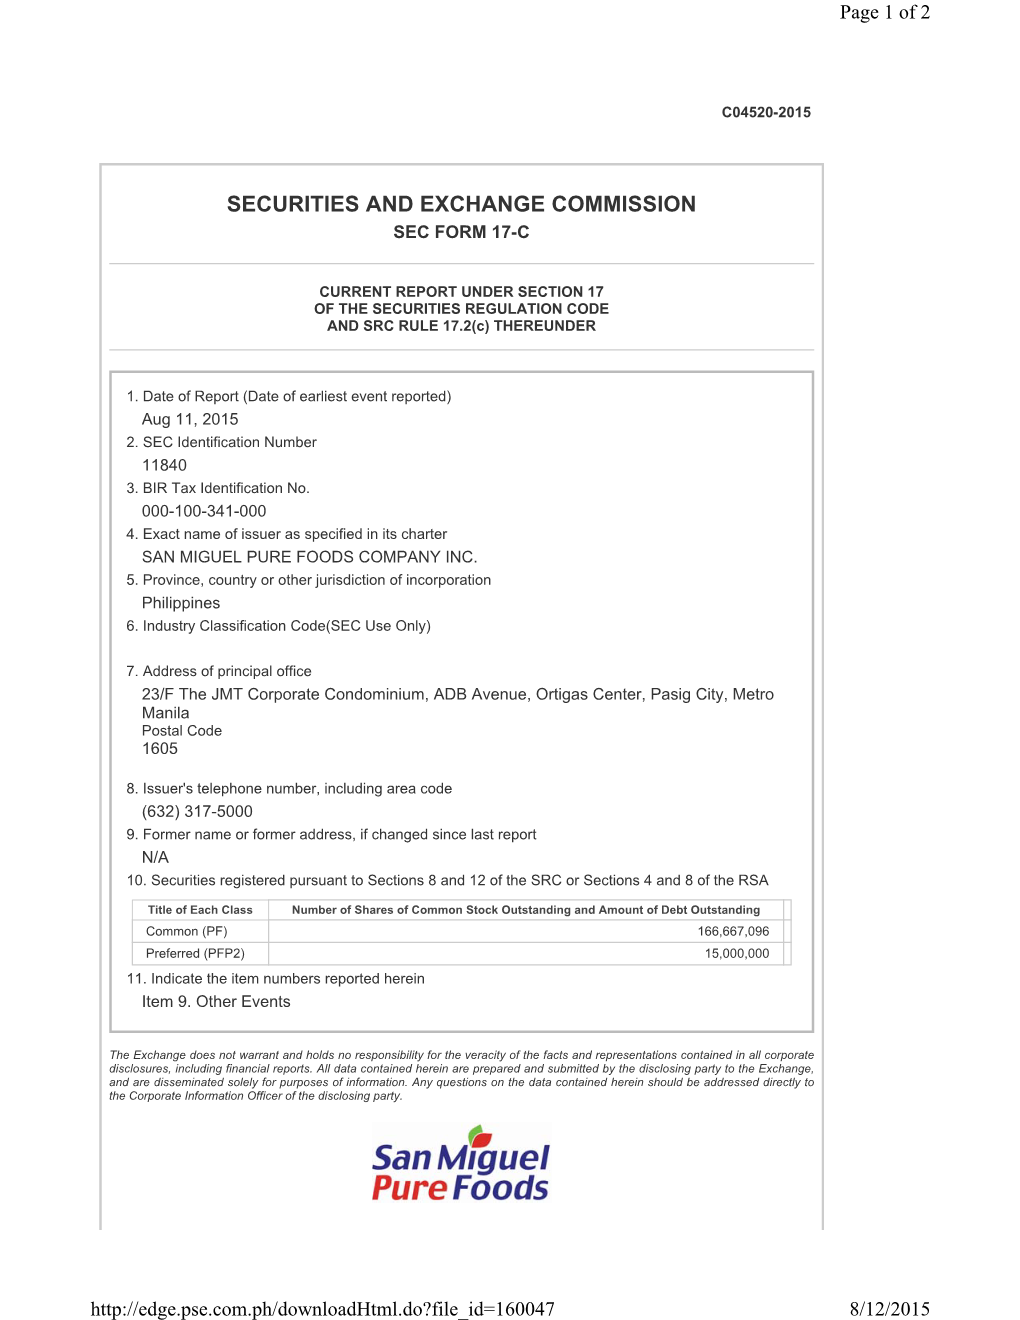 Securities and Exchange Commission Sec Form 17-C